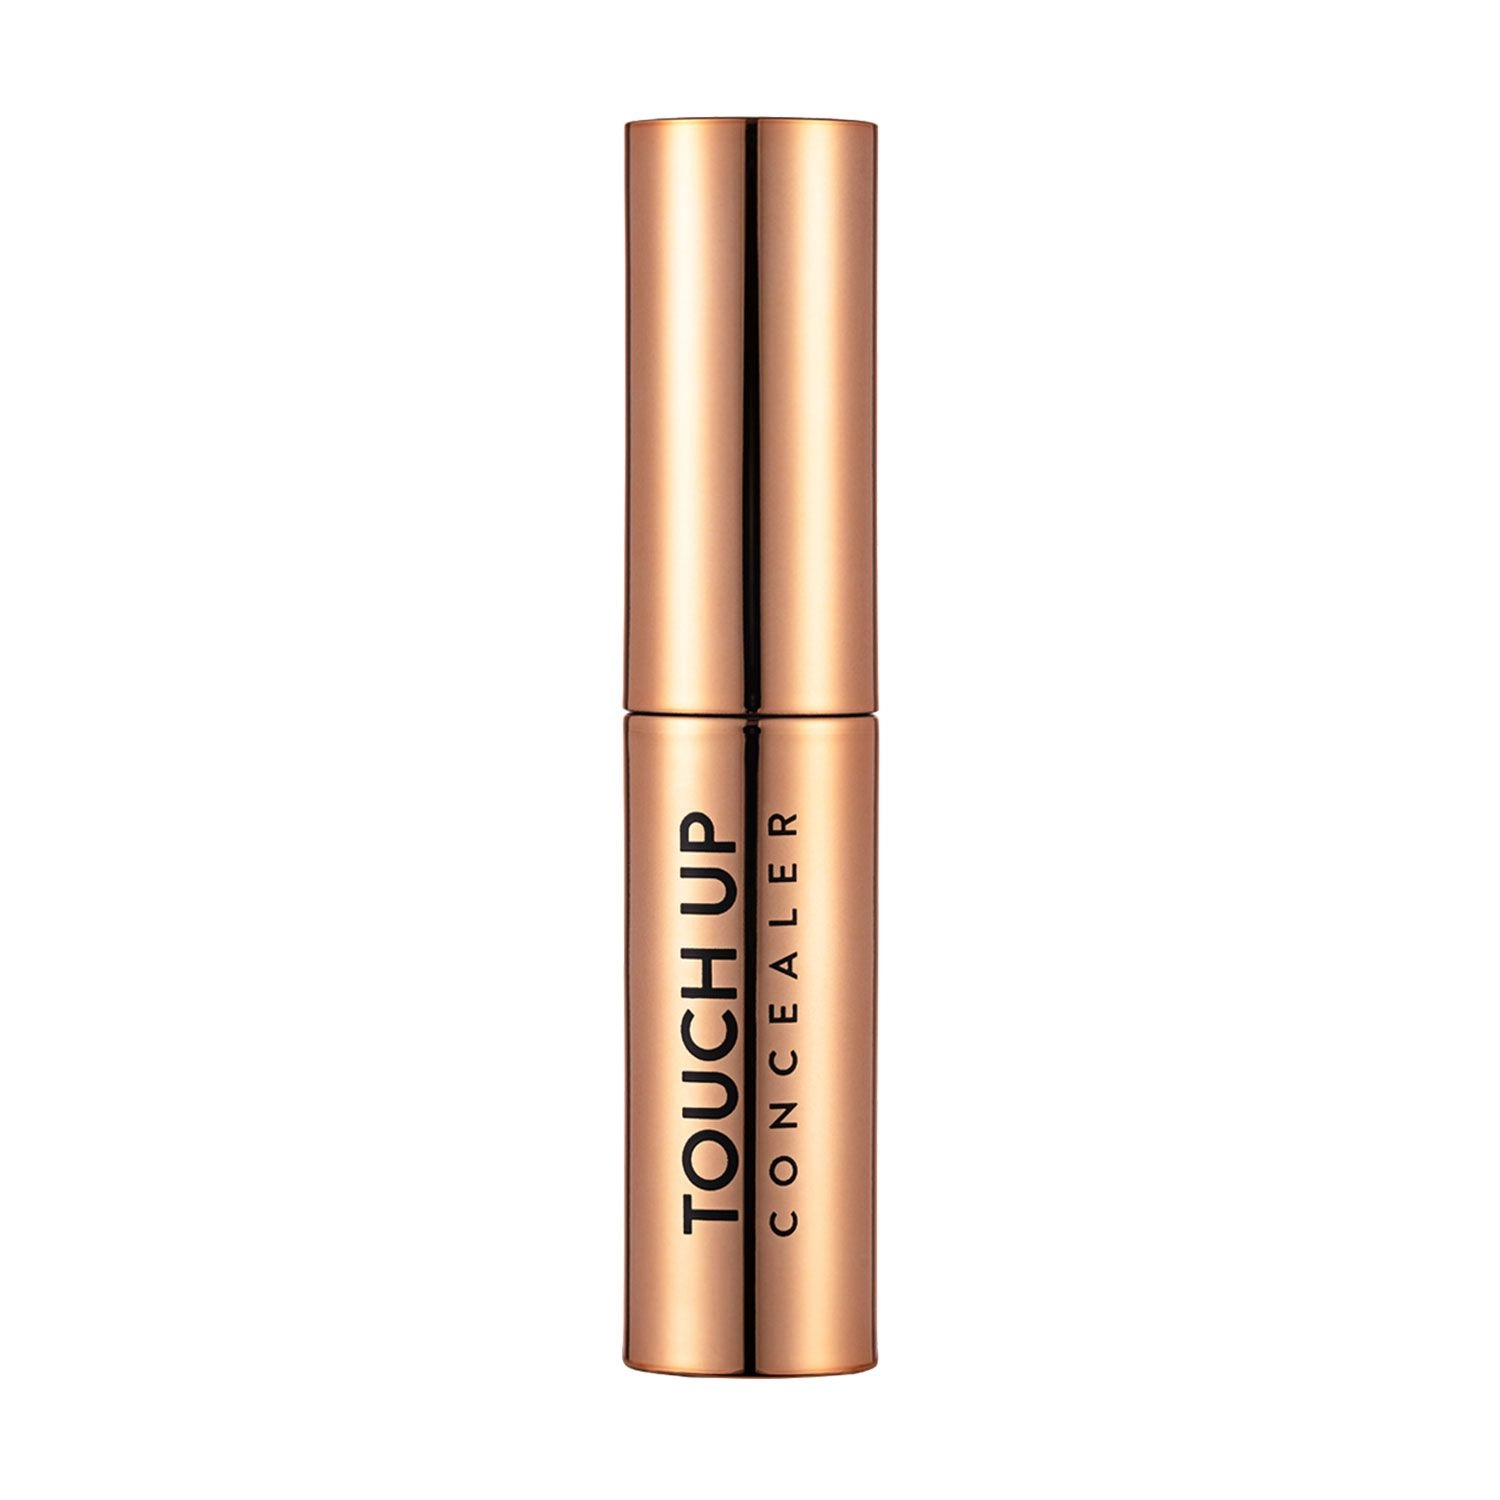 Flormar Консилер-стик для лица Touch Up Concealer, 3.5 г - фото N2